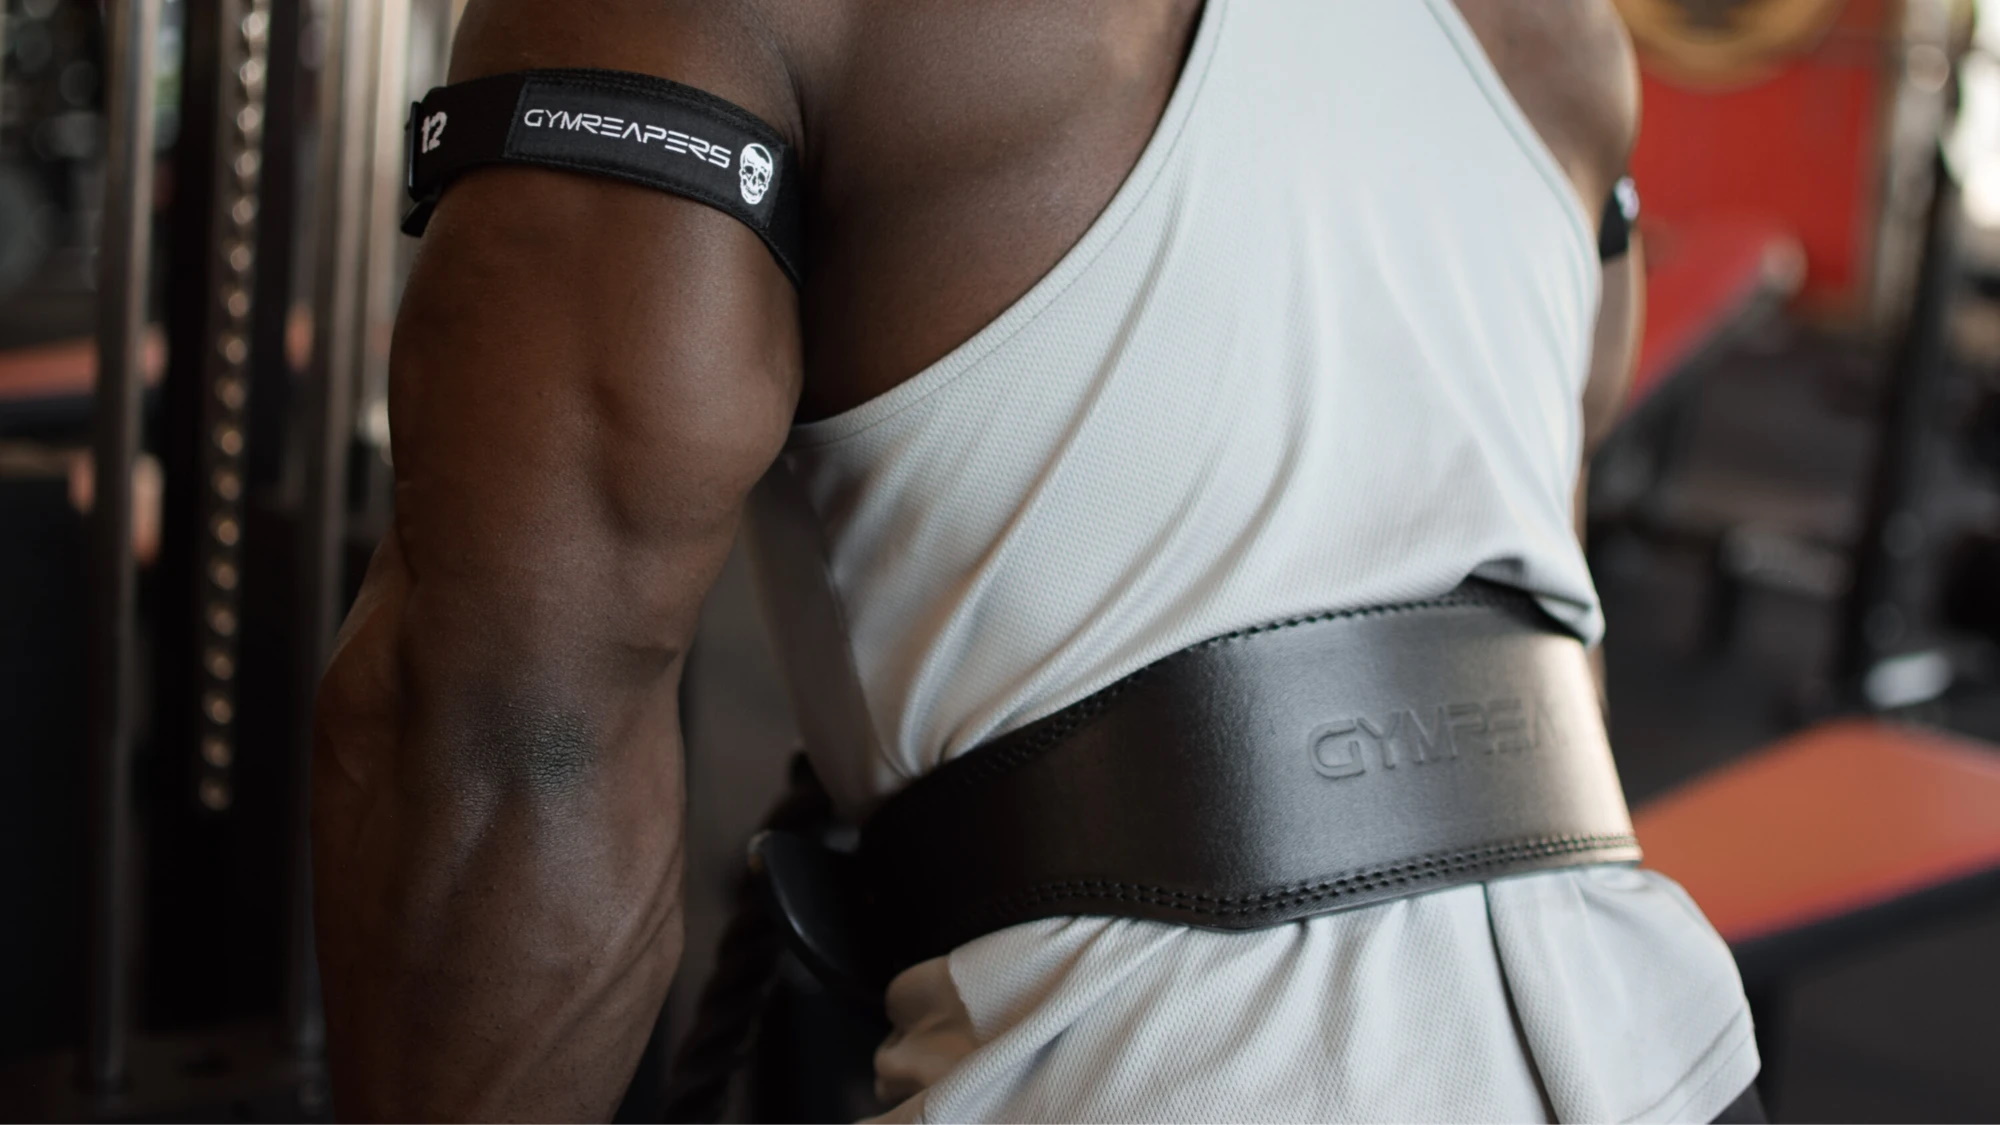 Gymreapers Quick Locking Weightlifting Belt Review: Best Belt for